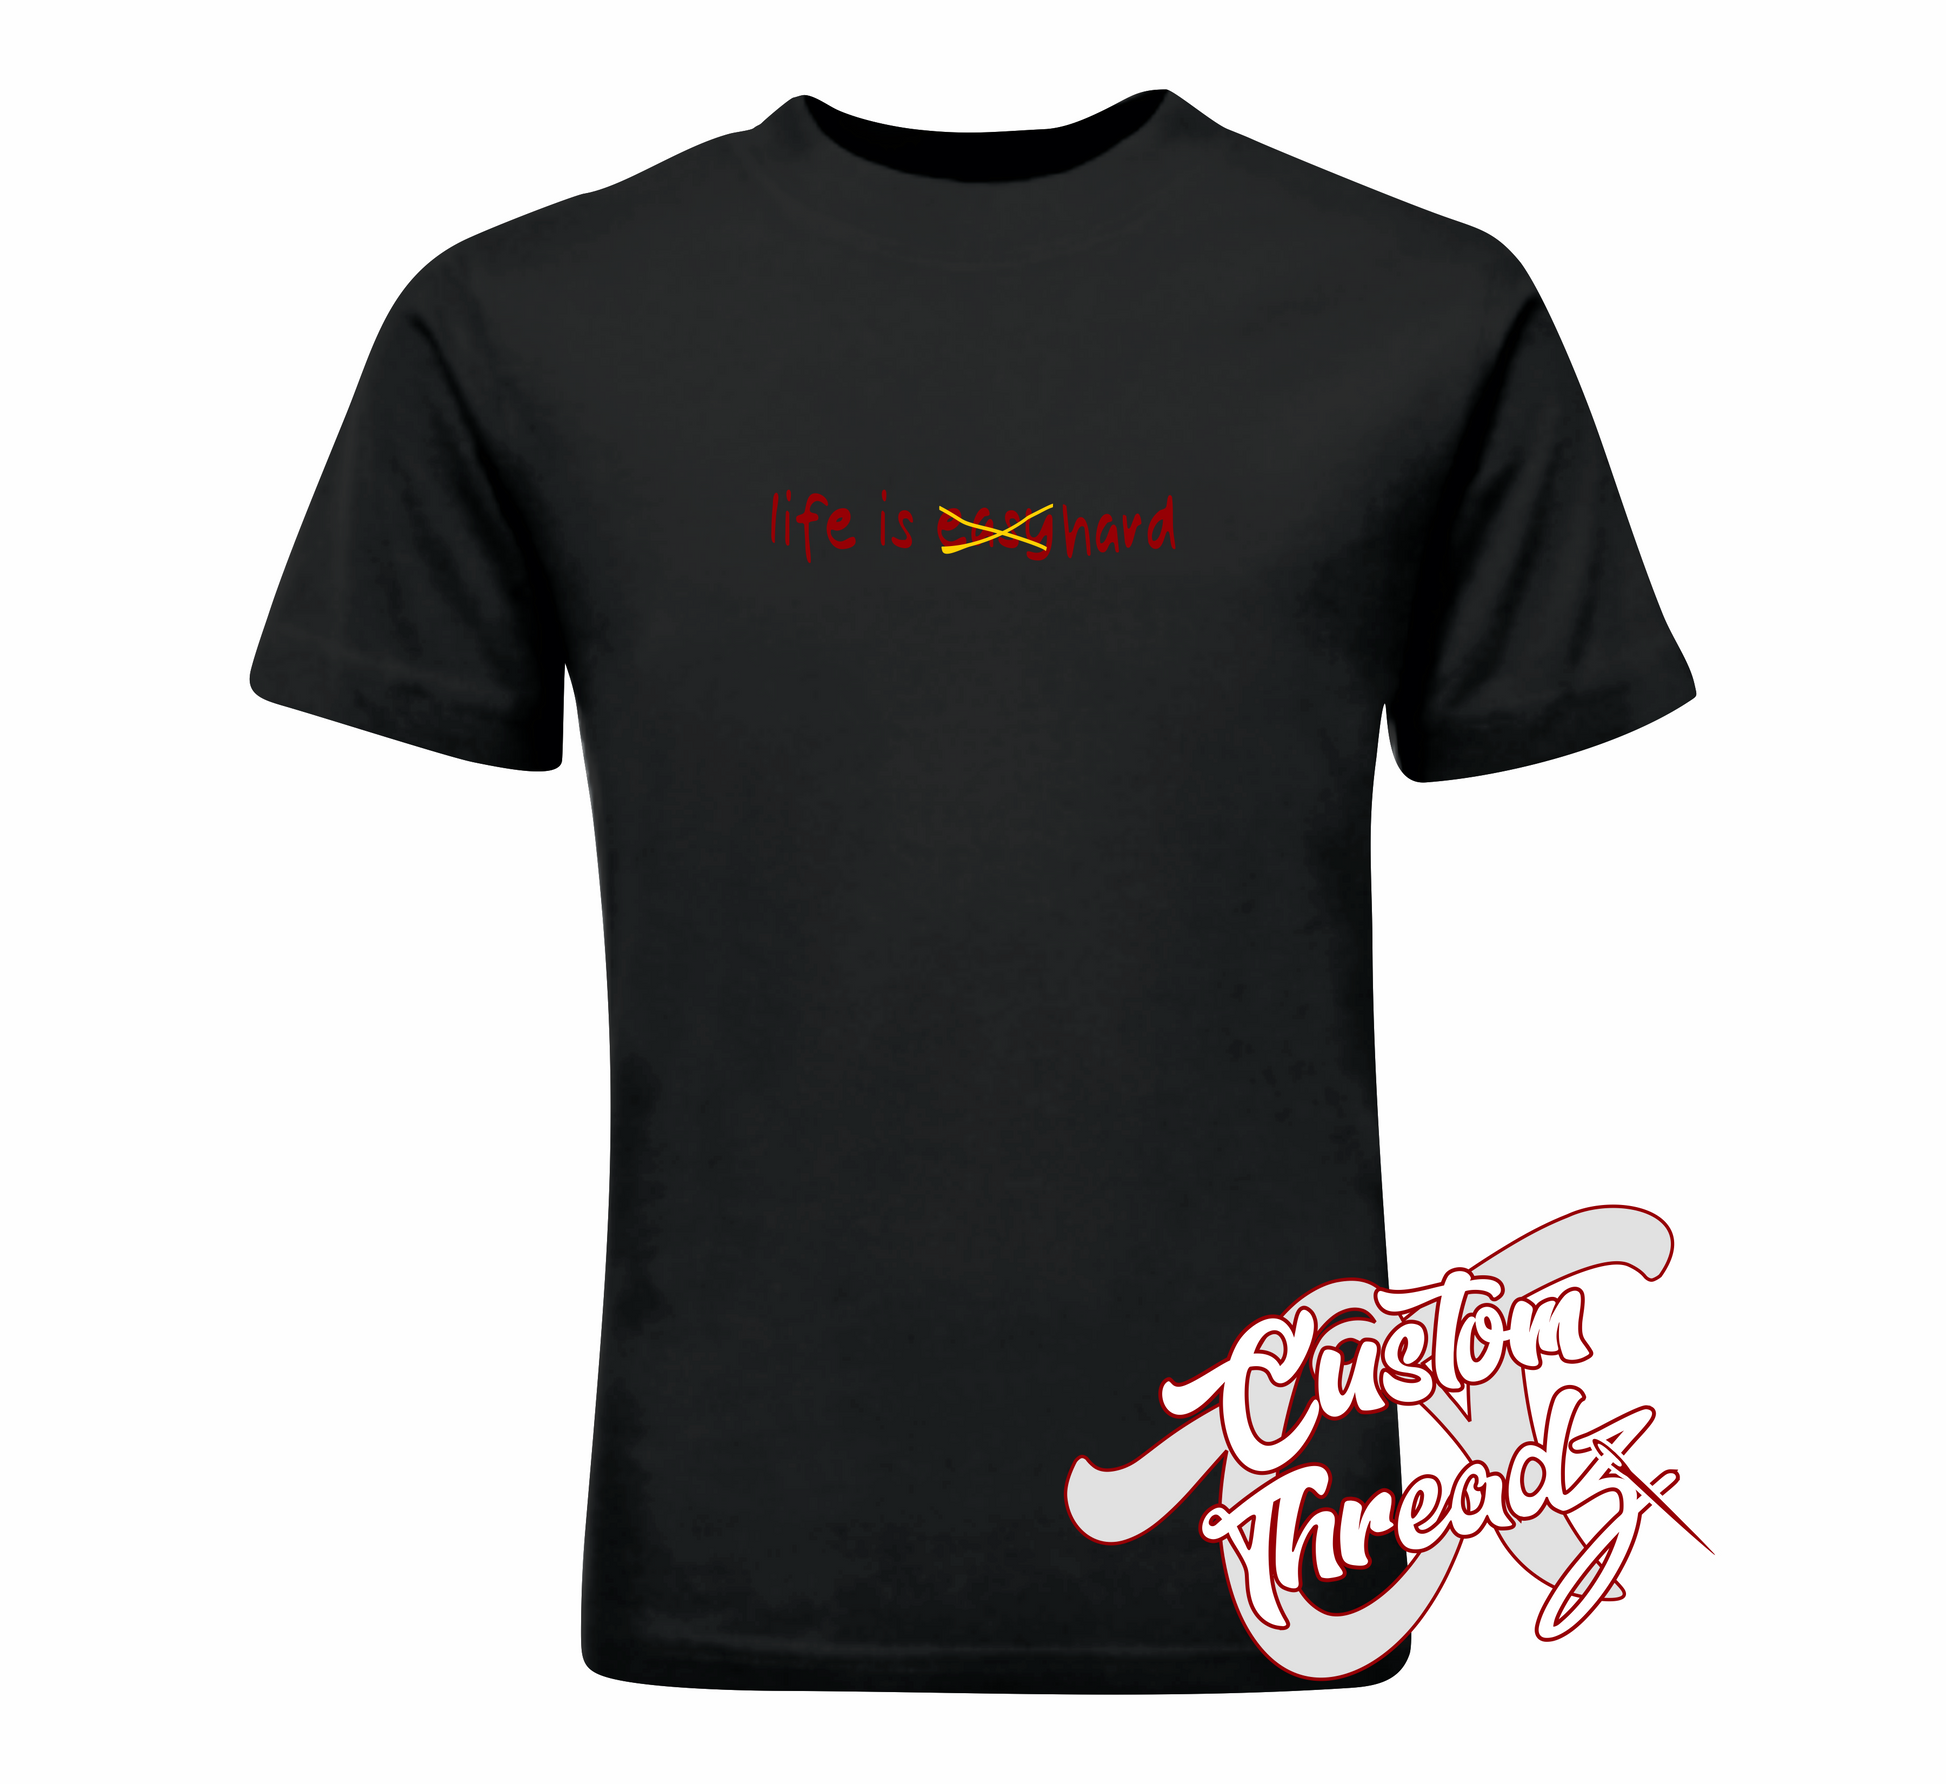 black t-shirt with life is easy crossed out hard DTG printed design